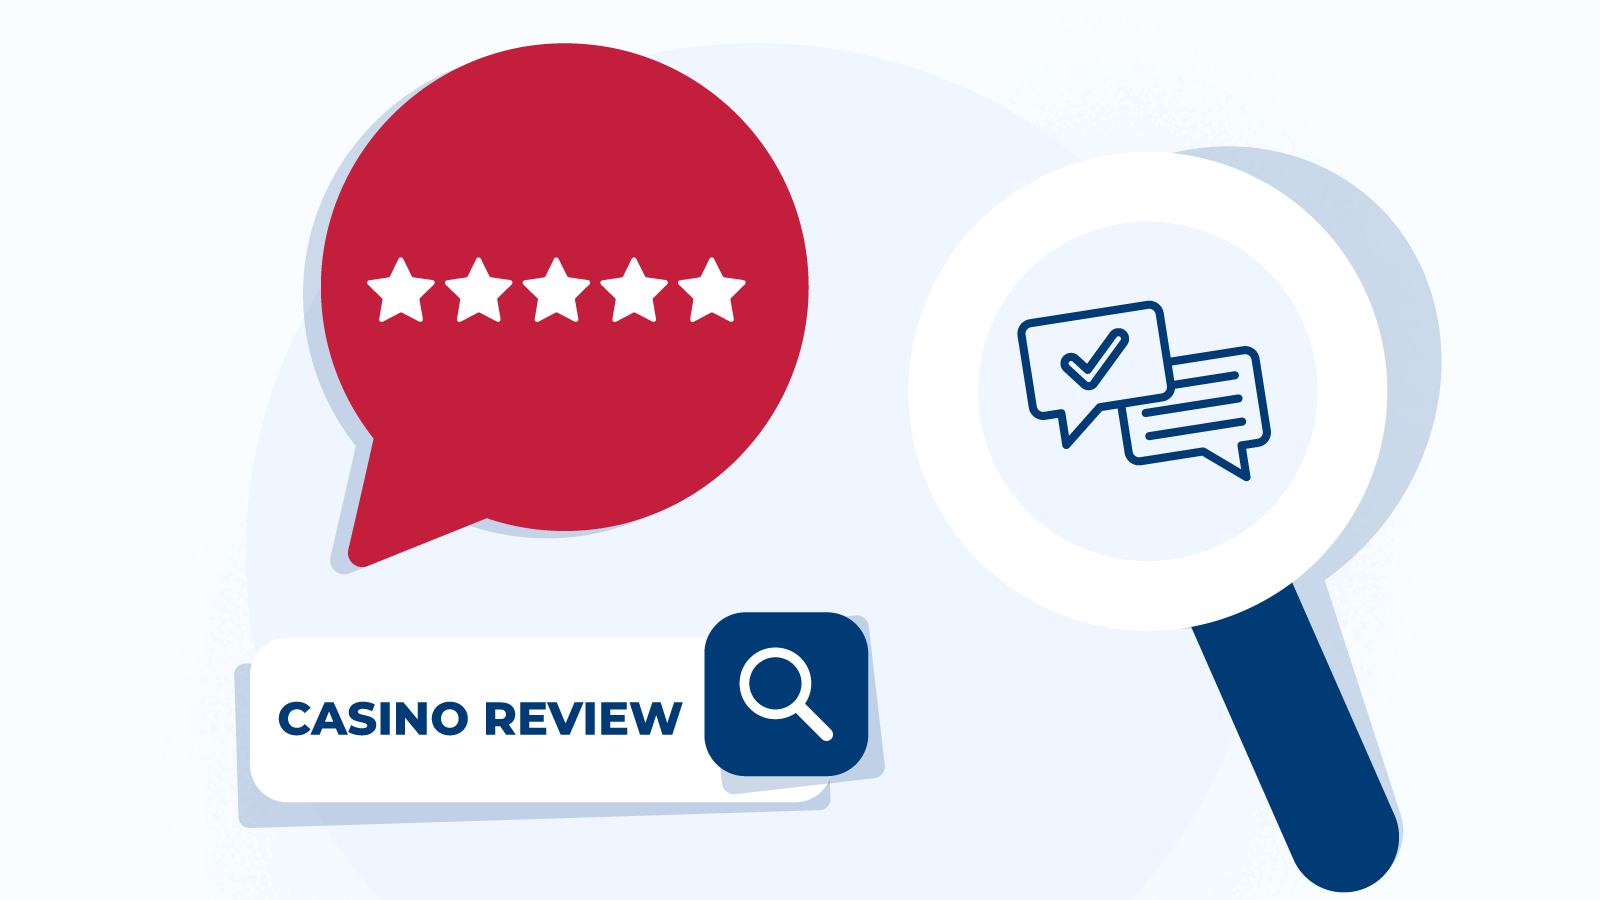 What is a casino review